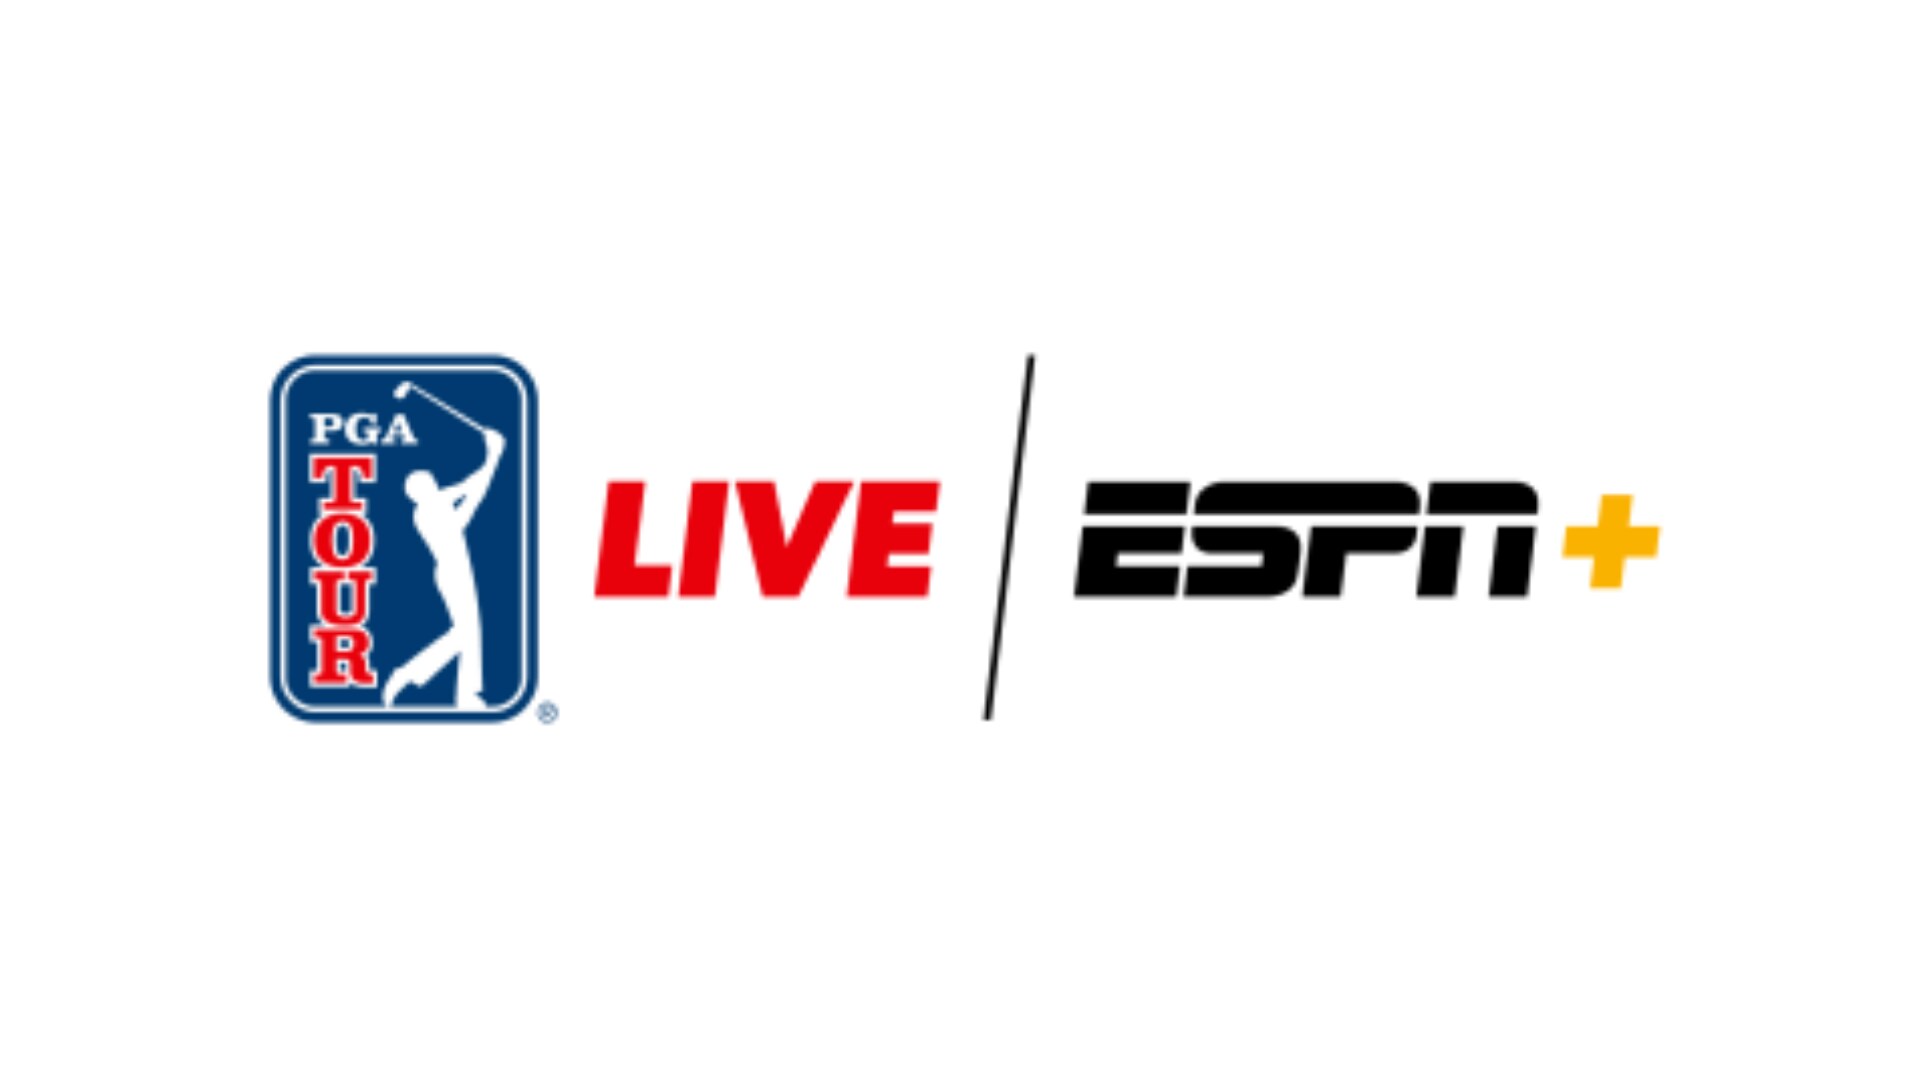 PGA TOUR LIVE on ESPN+ Tees Off in Hawaii This Week at Sentry Tournament of Champions in Kapalua, Maui